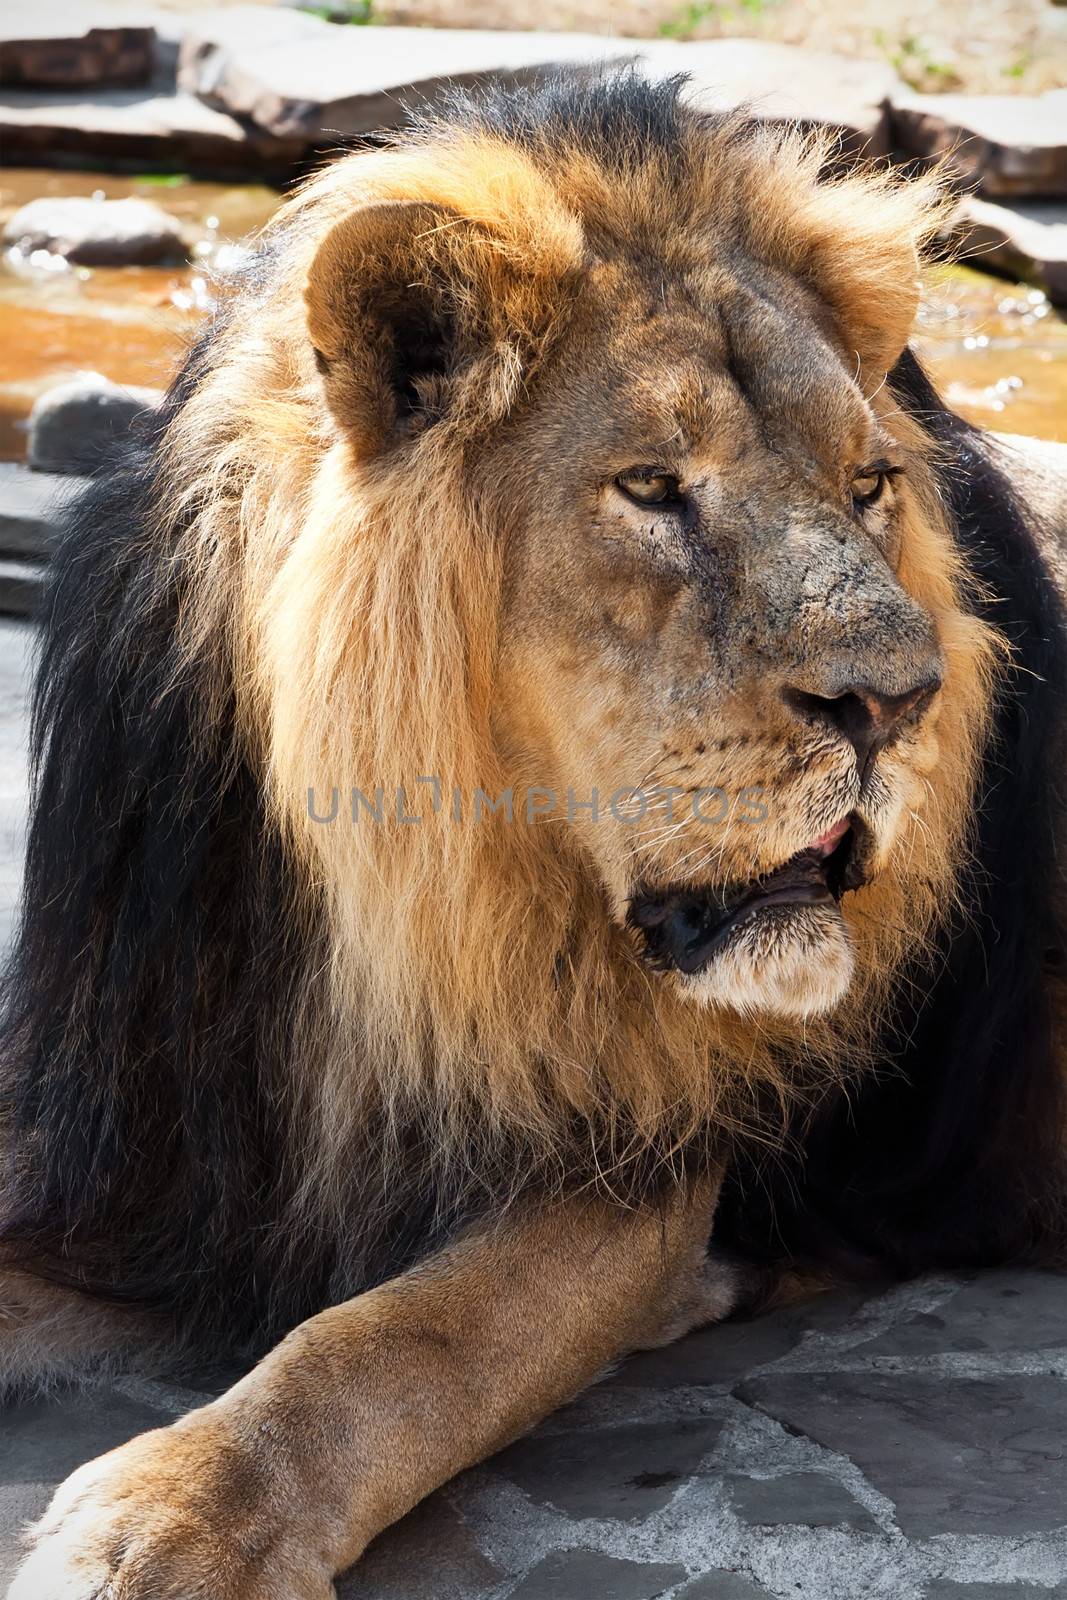 King of animals - African male lion in zoo